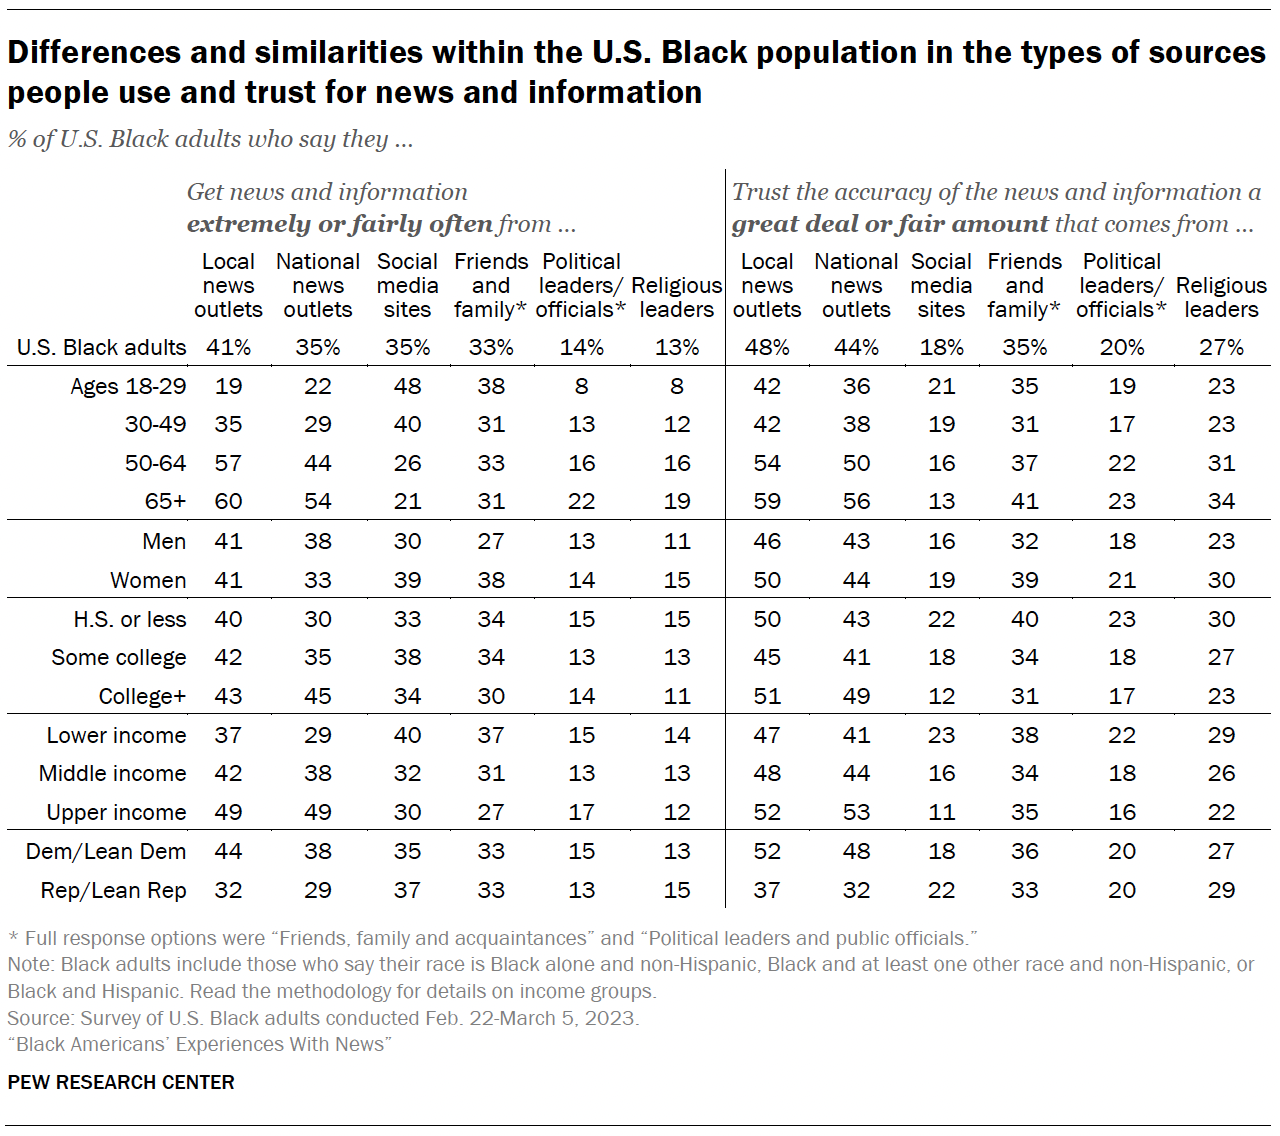 Differences and similarities within the U.S. Black population in the types of sources people use and trust for news and information